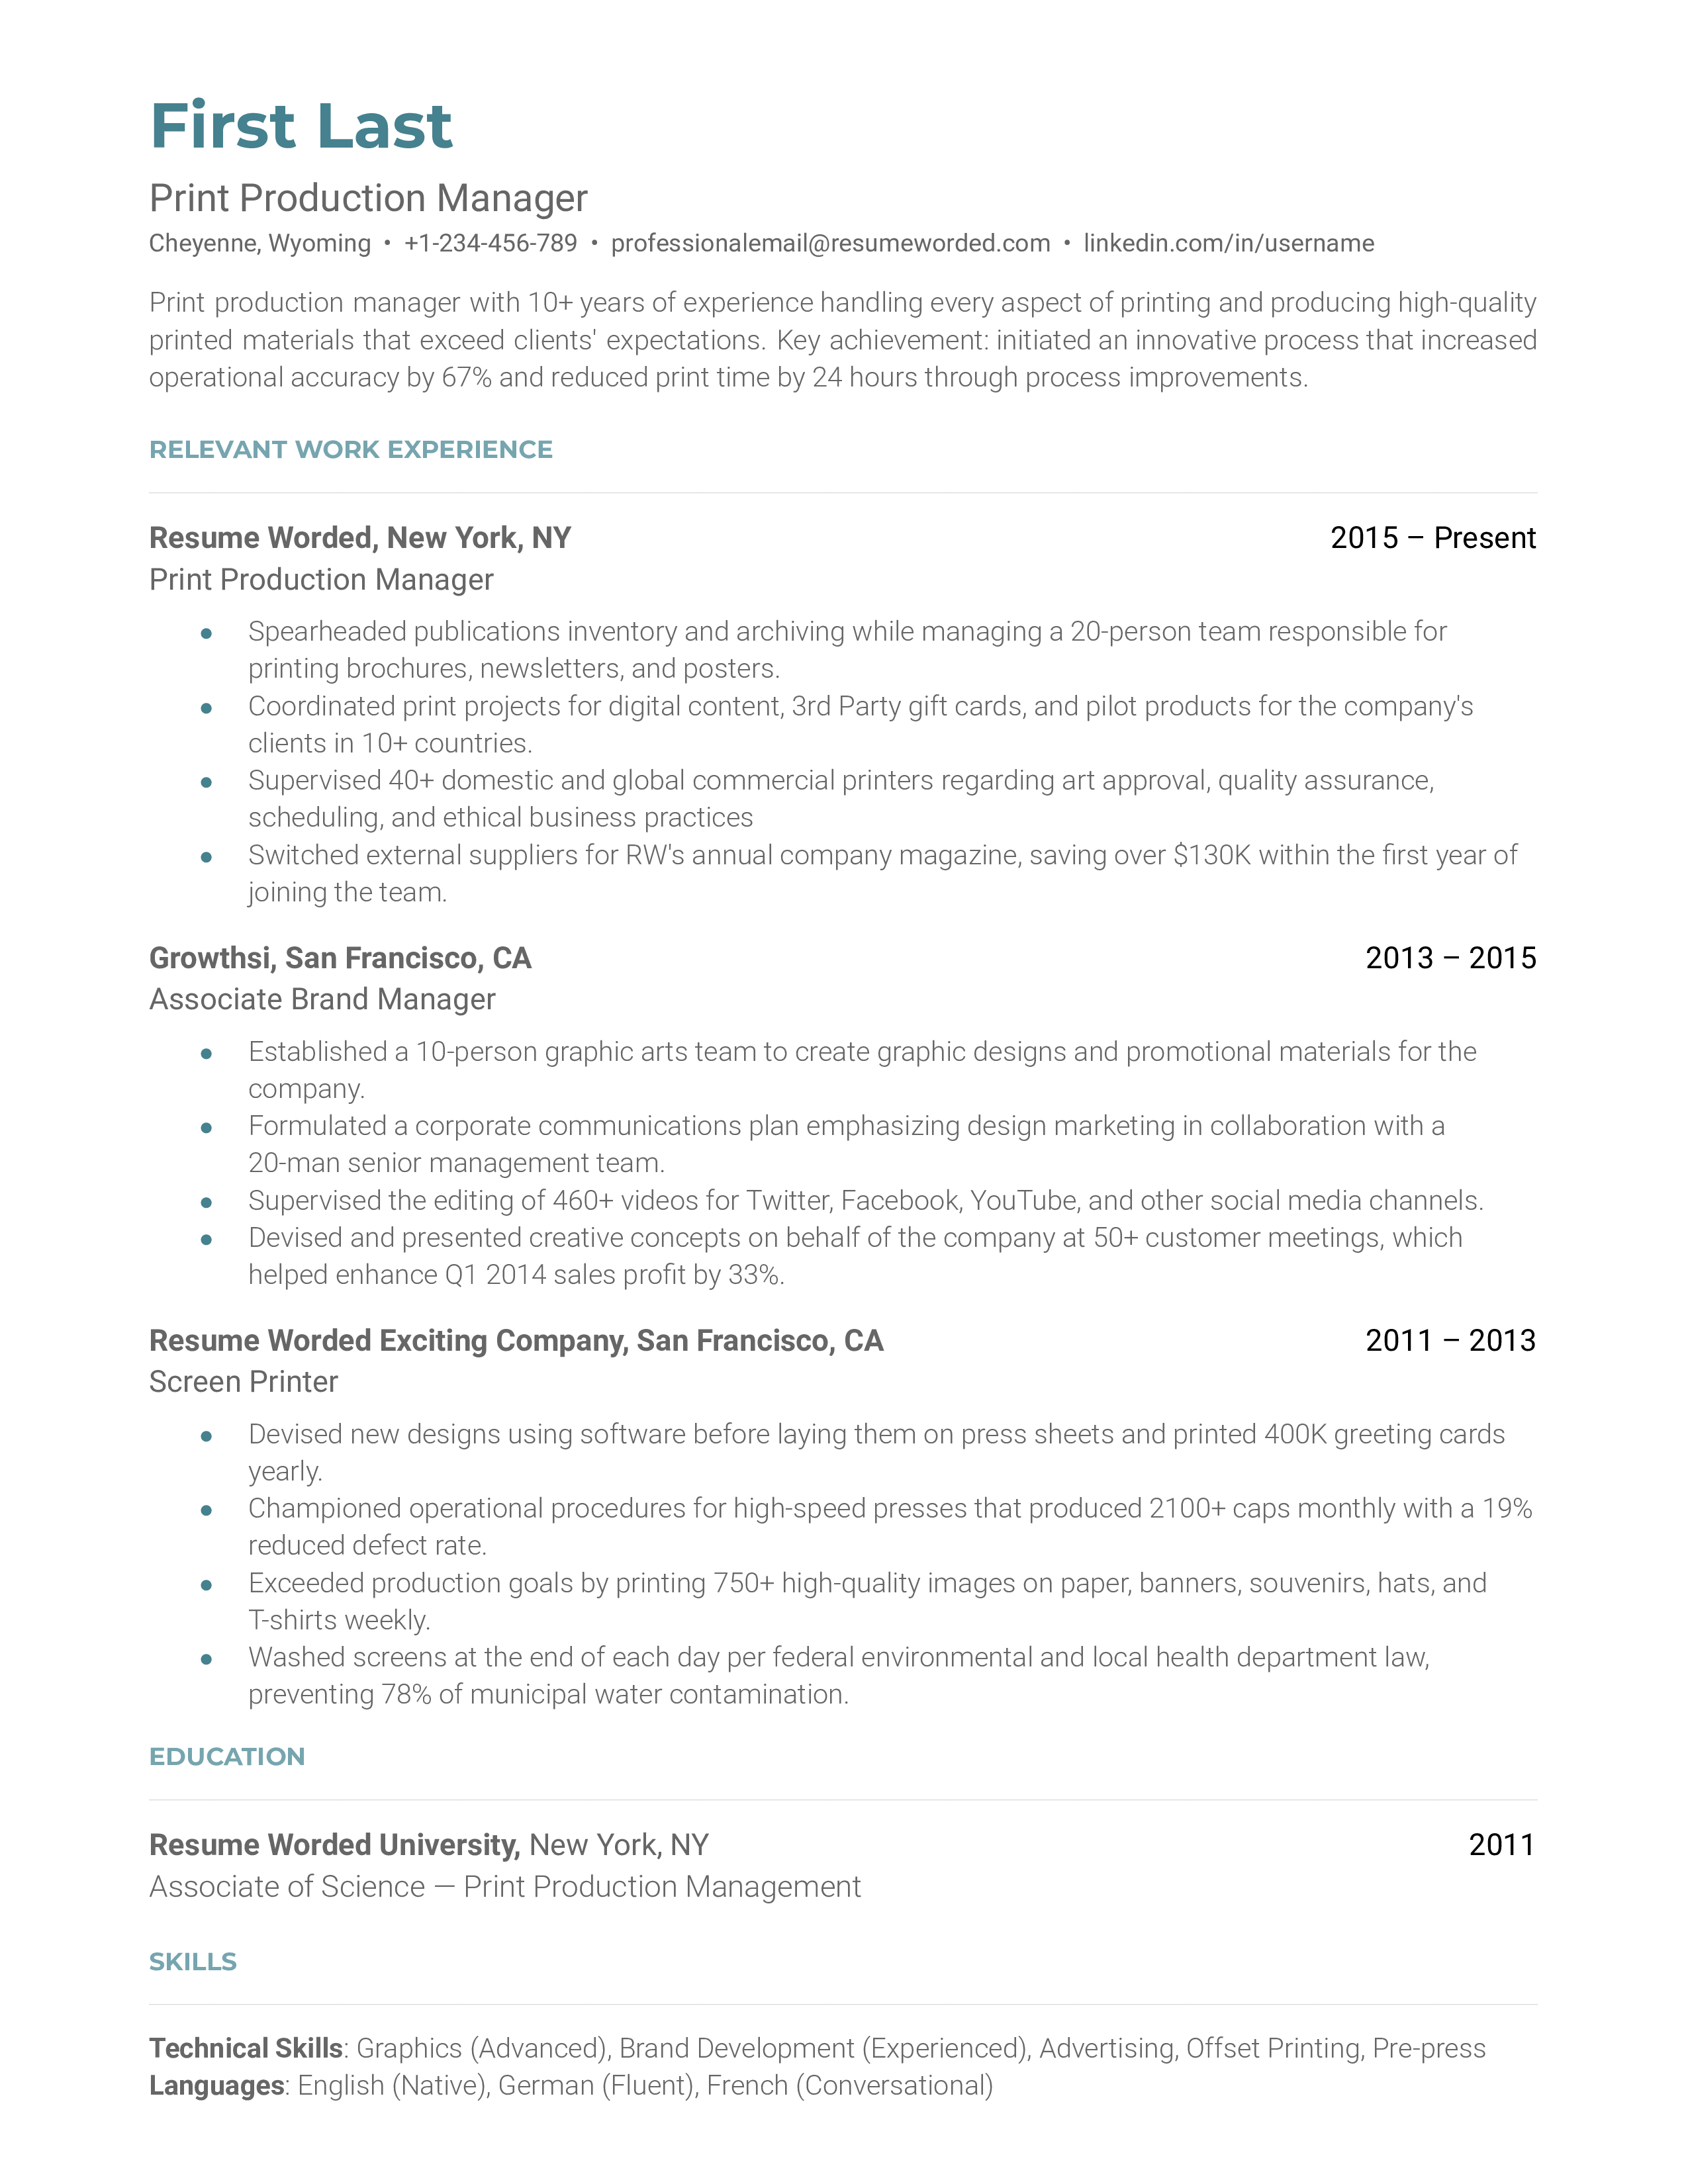 Print Production Manager resume highlighting technical expertise and project management skills